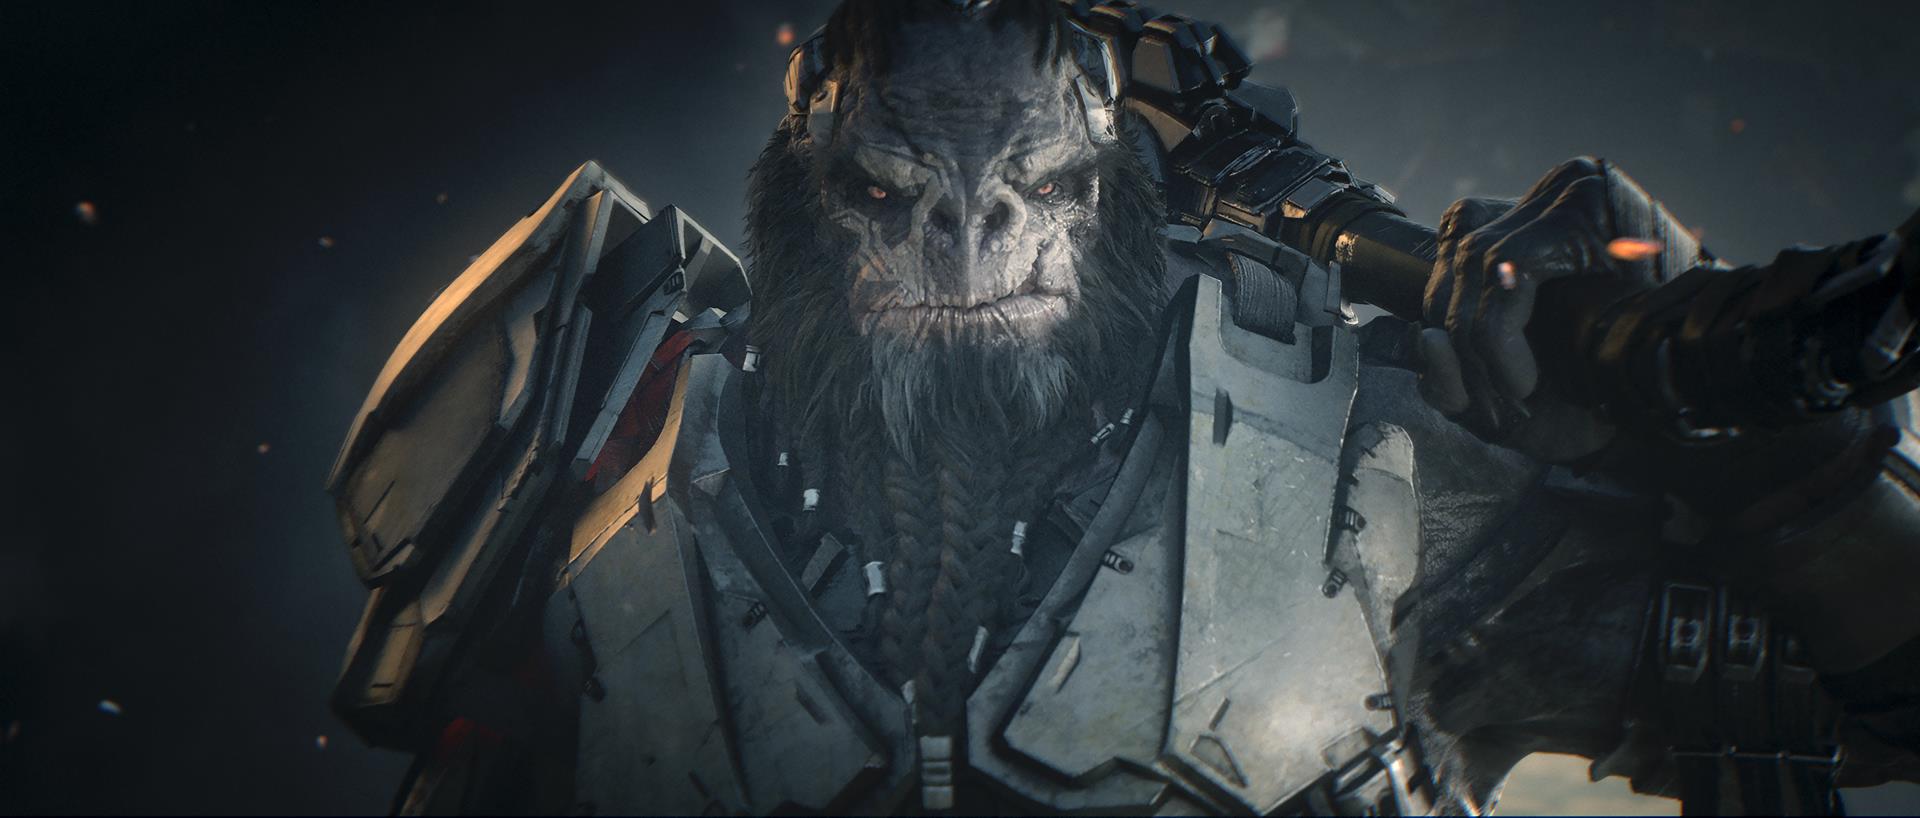 Image for Halo Wars 2 - watch gameplay from the final build, including some impressions